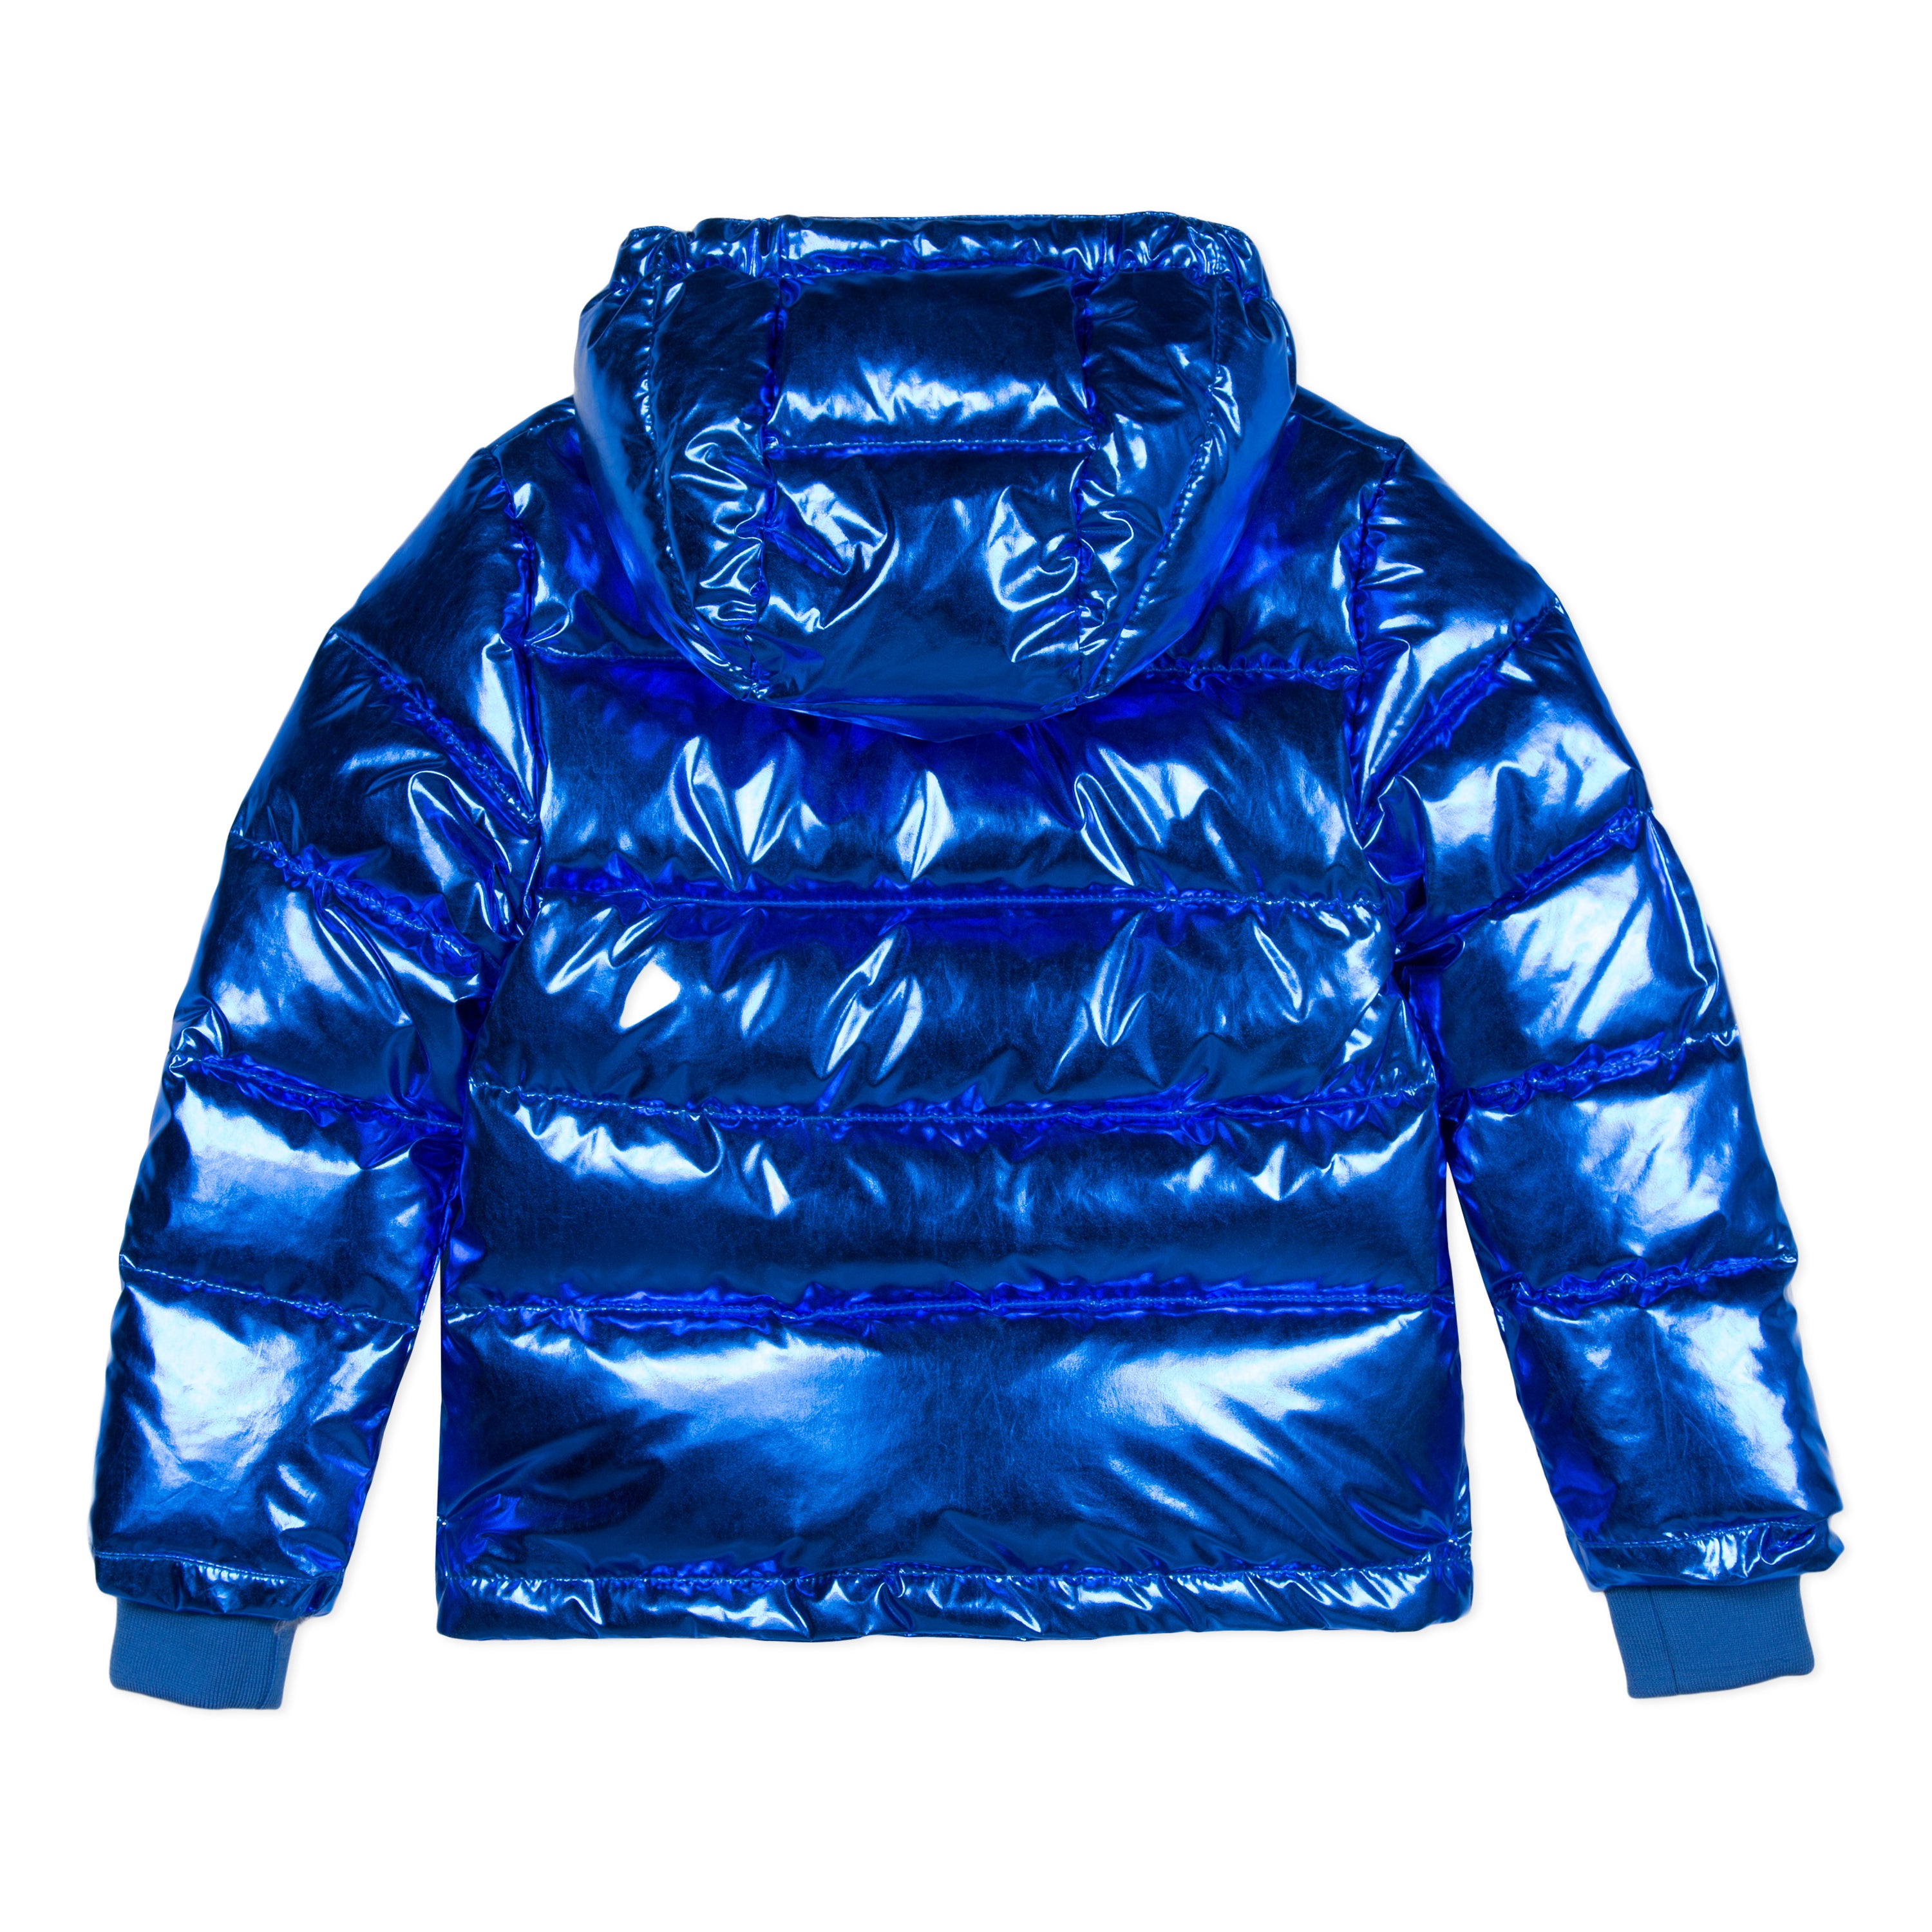 Boys Bright Blue Hooded Padded Down Coat